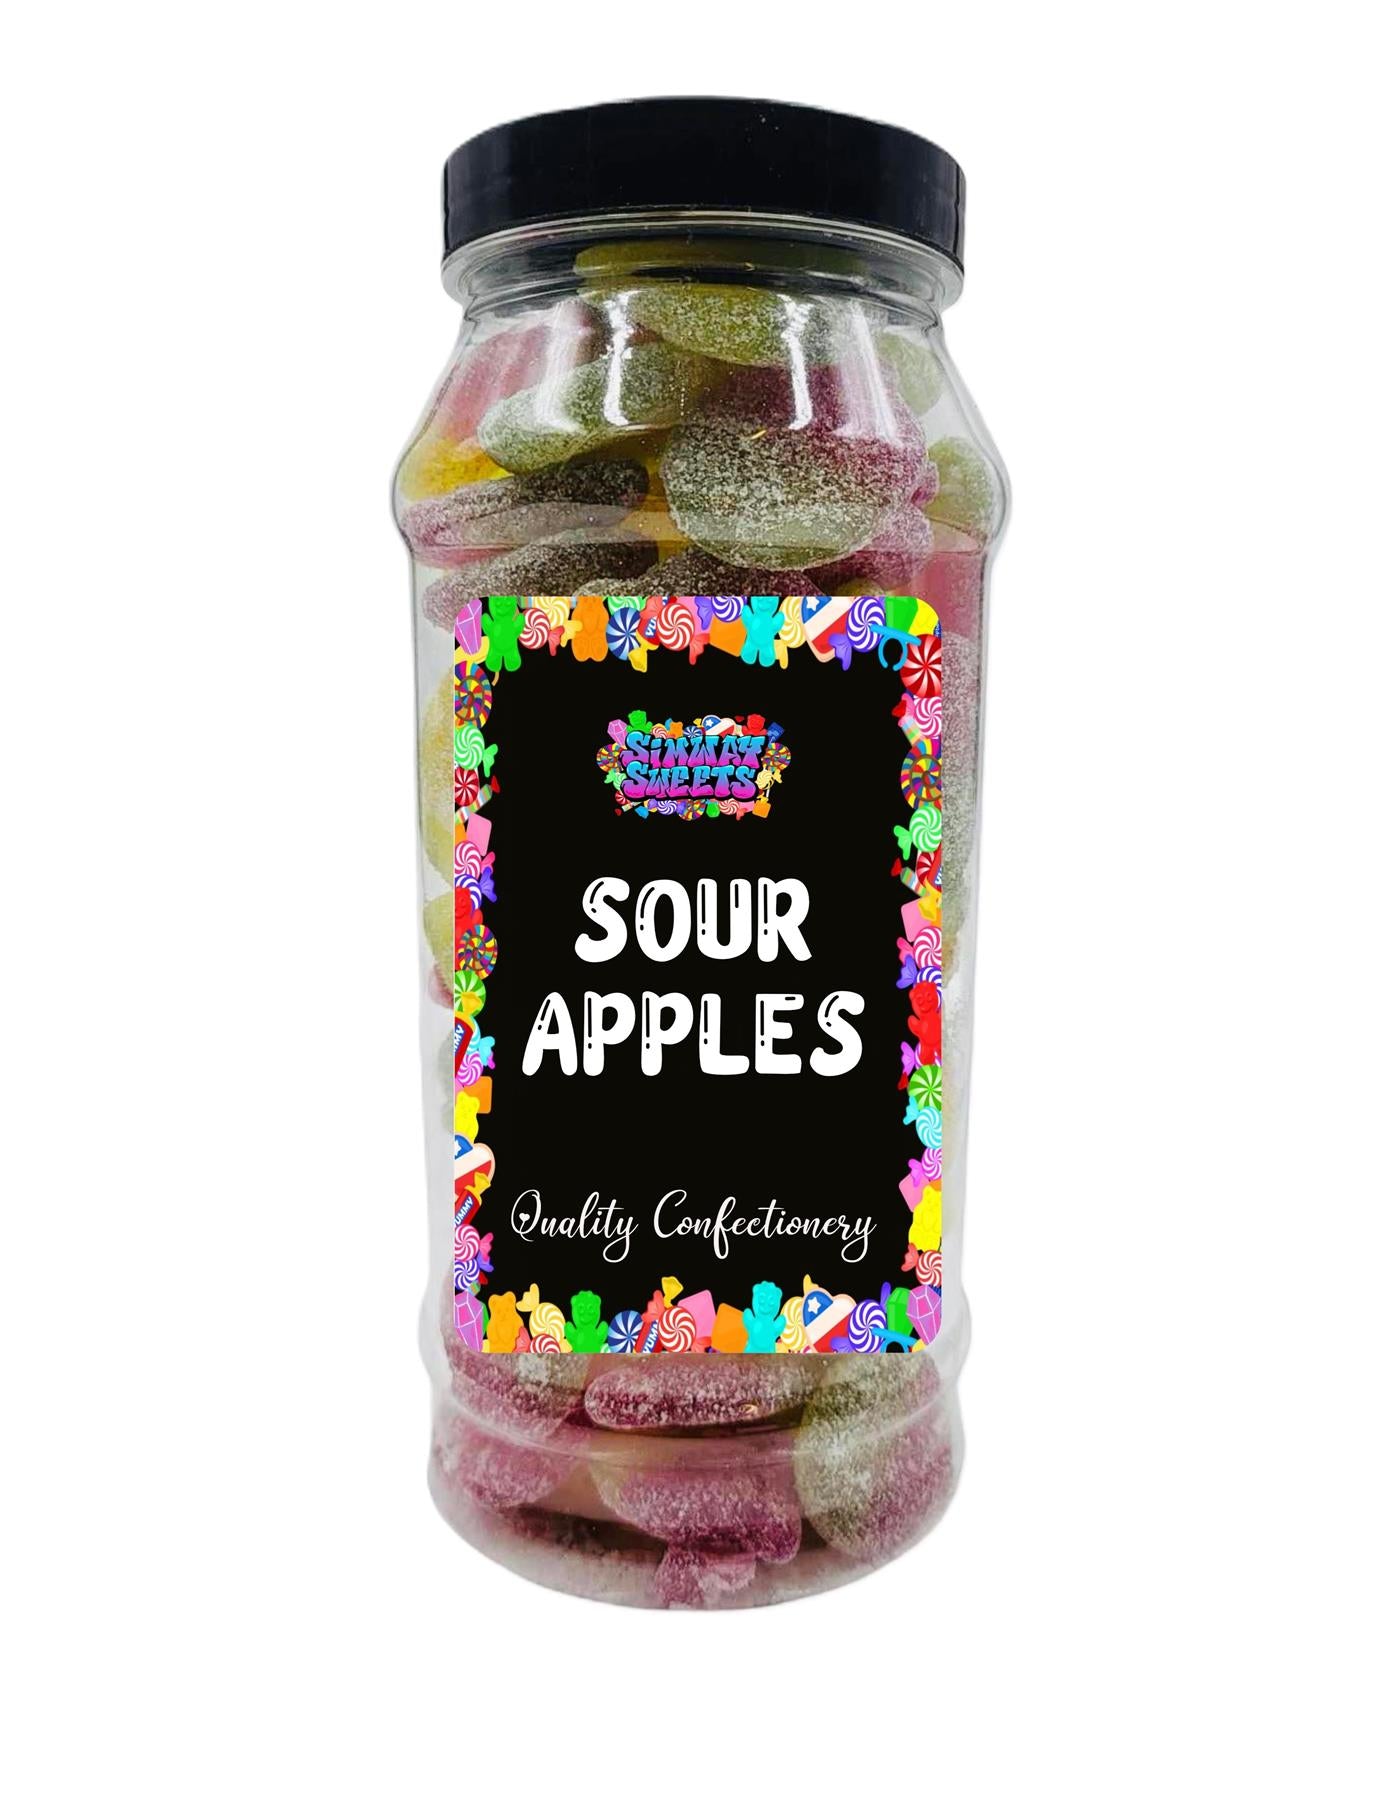 Fizzy Sour Apples Sweets Gummy Jelly Retro Sweets Gift Jar - 700g